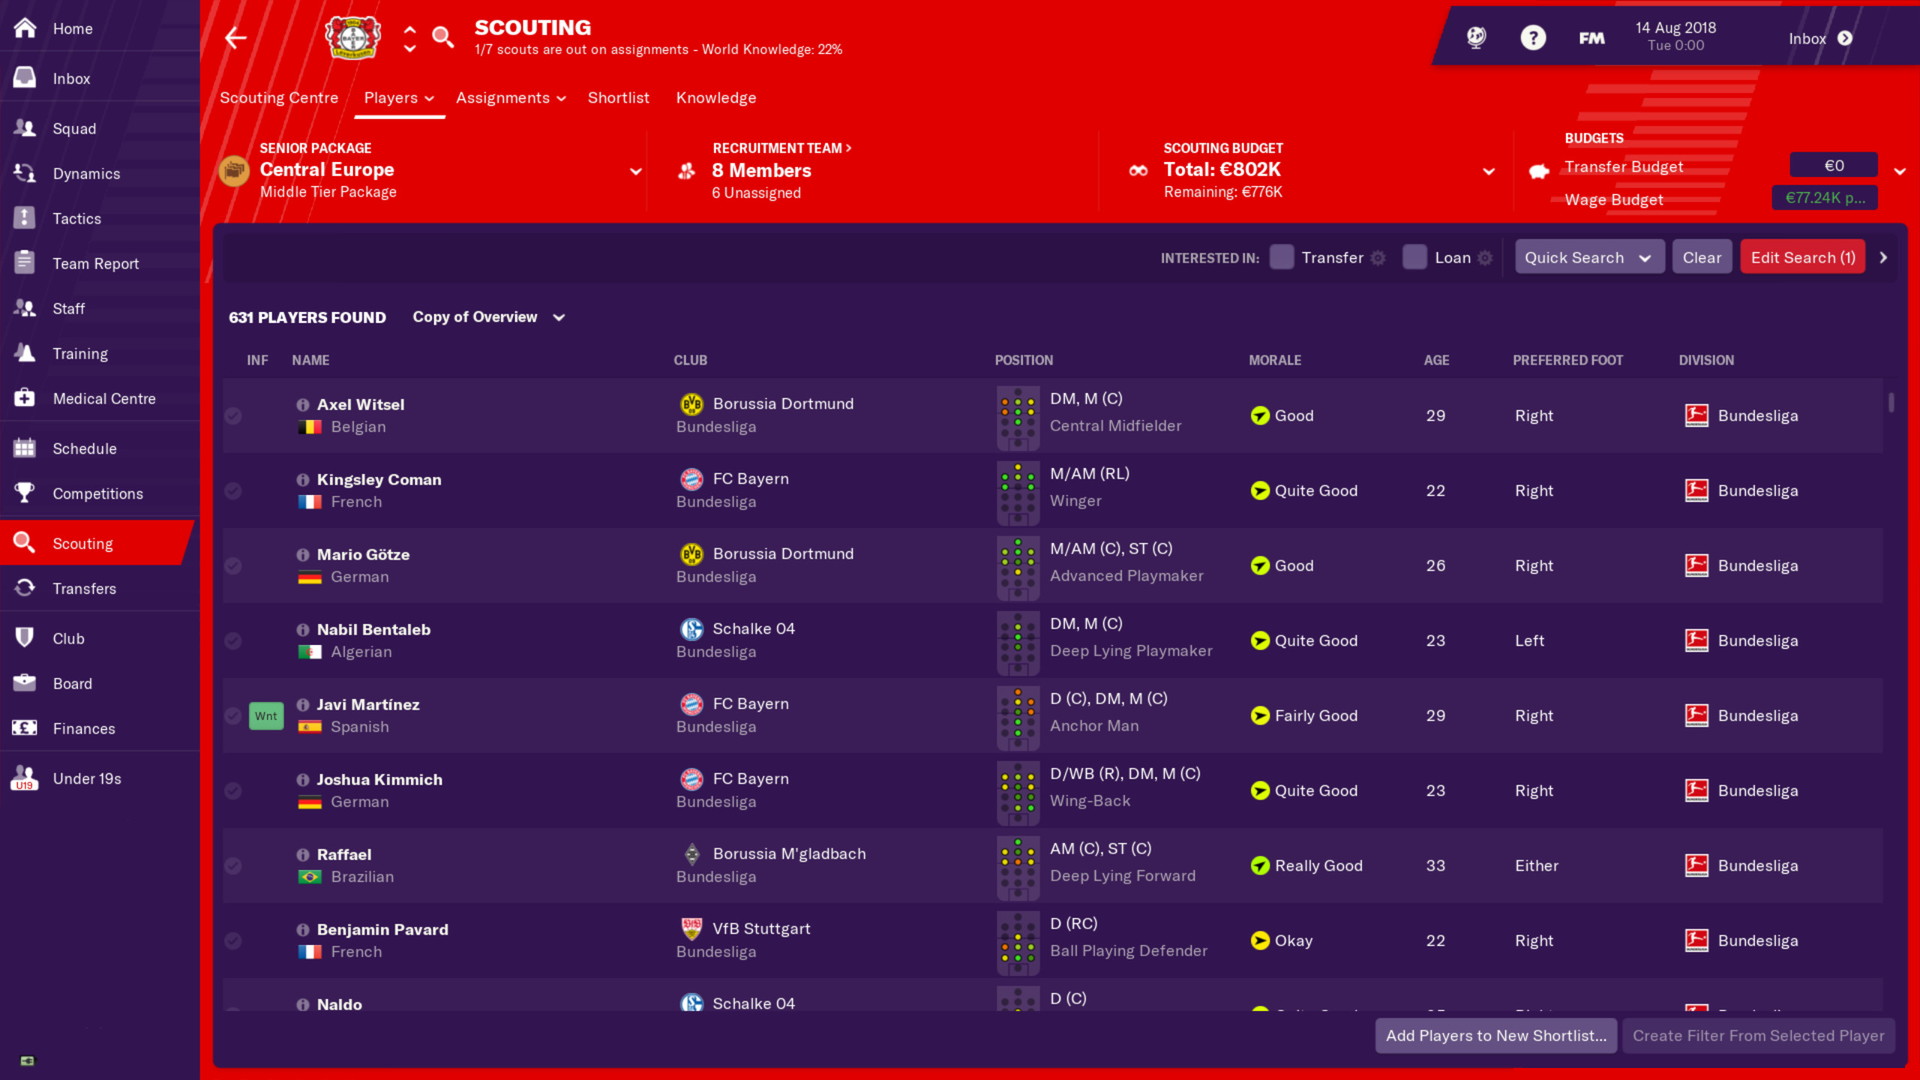 football manager 2018 buy download